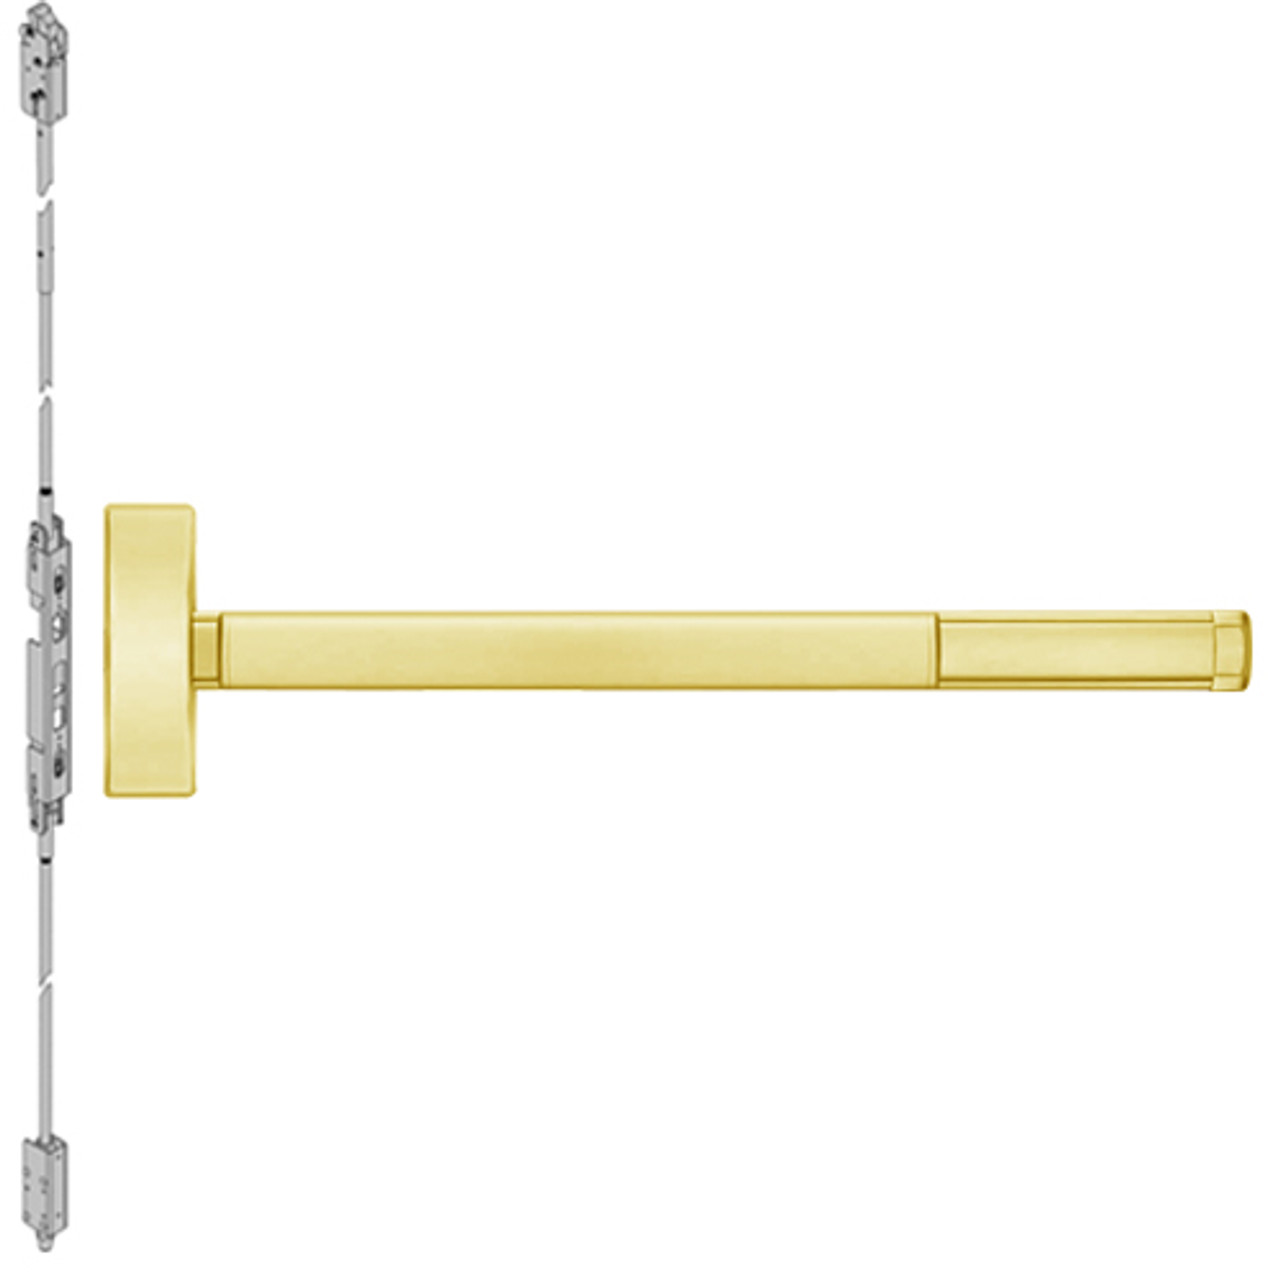 ELR2814LBR-605-48 PHI 2800 Series Concealed Vertical Rod Exit Device with Electric Latch Retraction Prepped for Lever-Knob Always Active in Bright Brass Finish